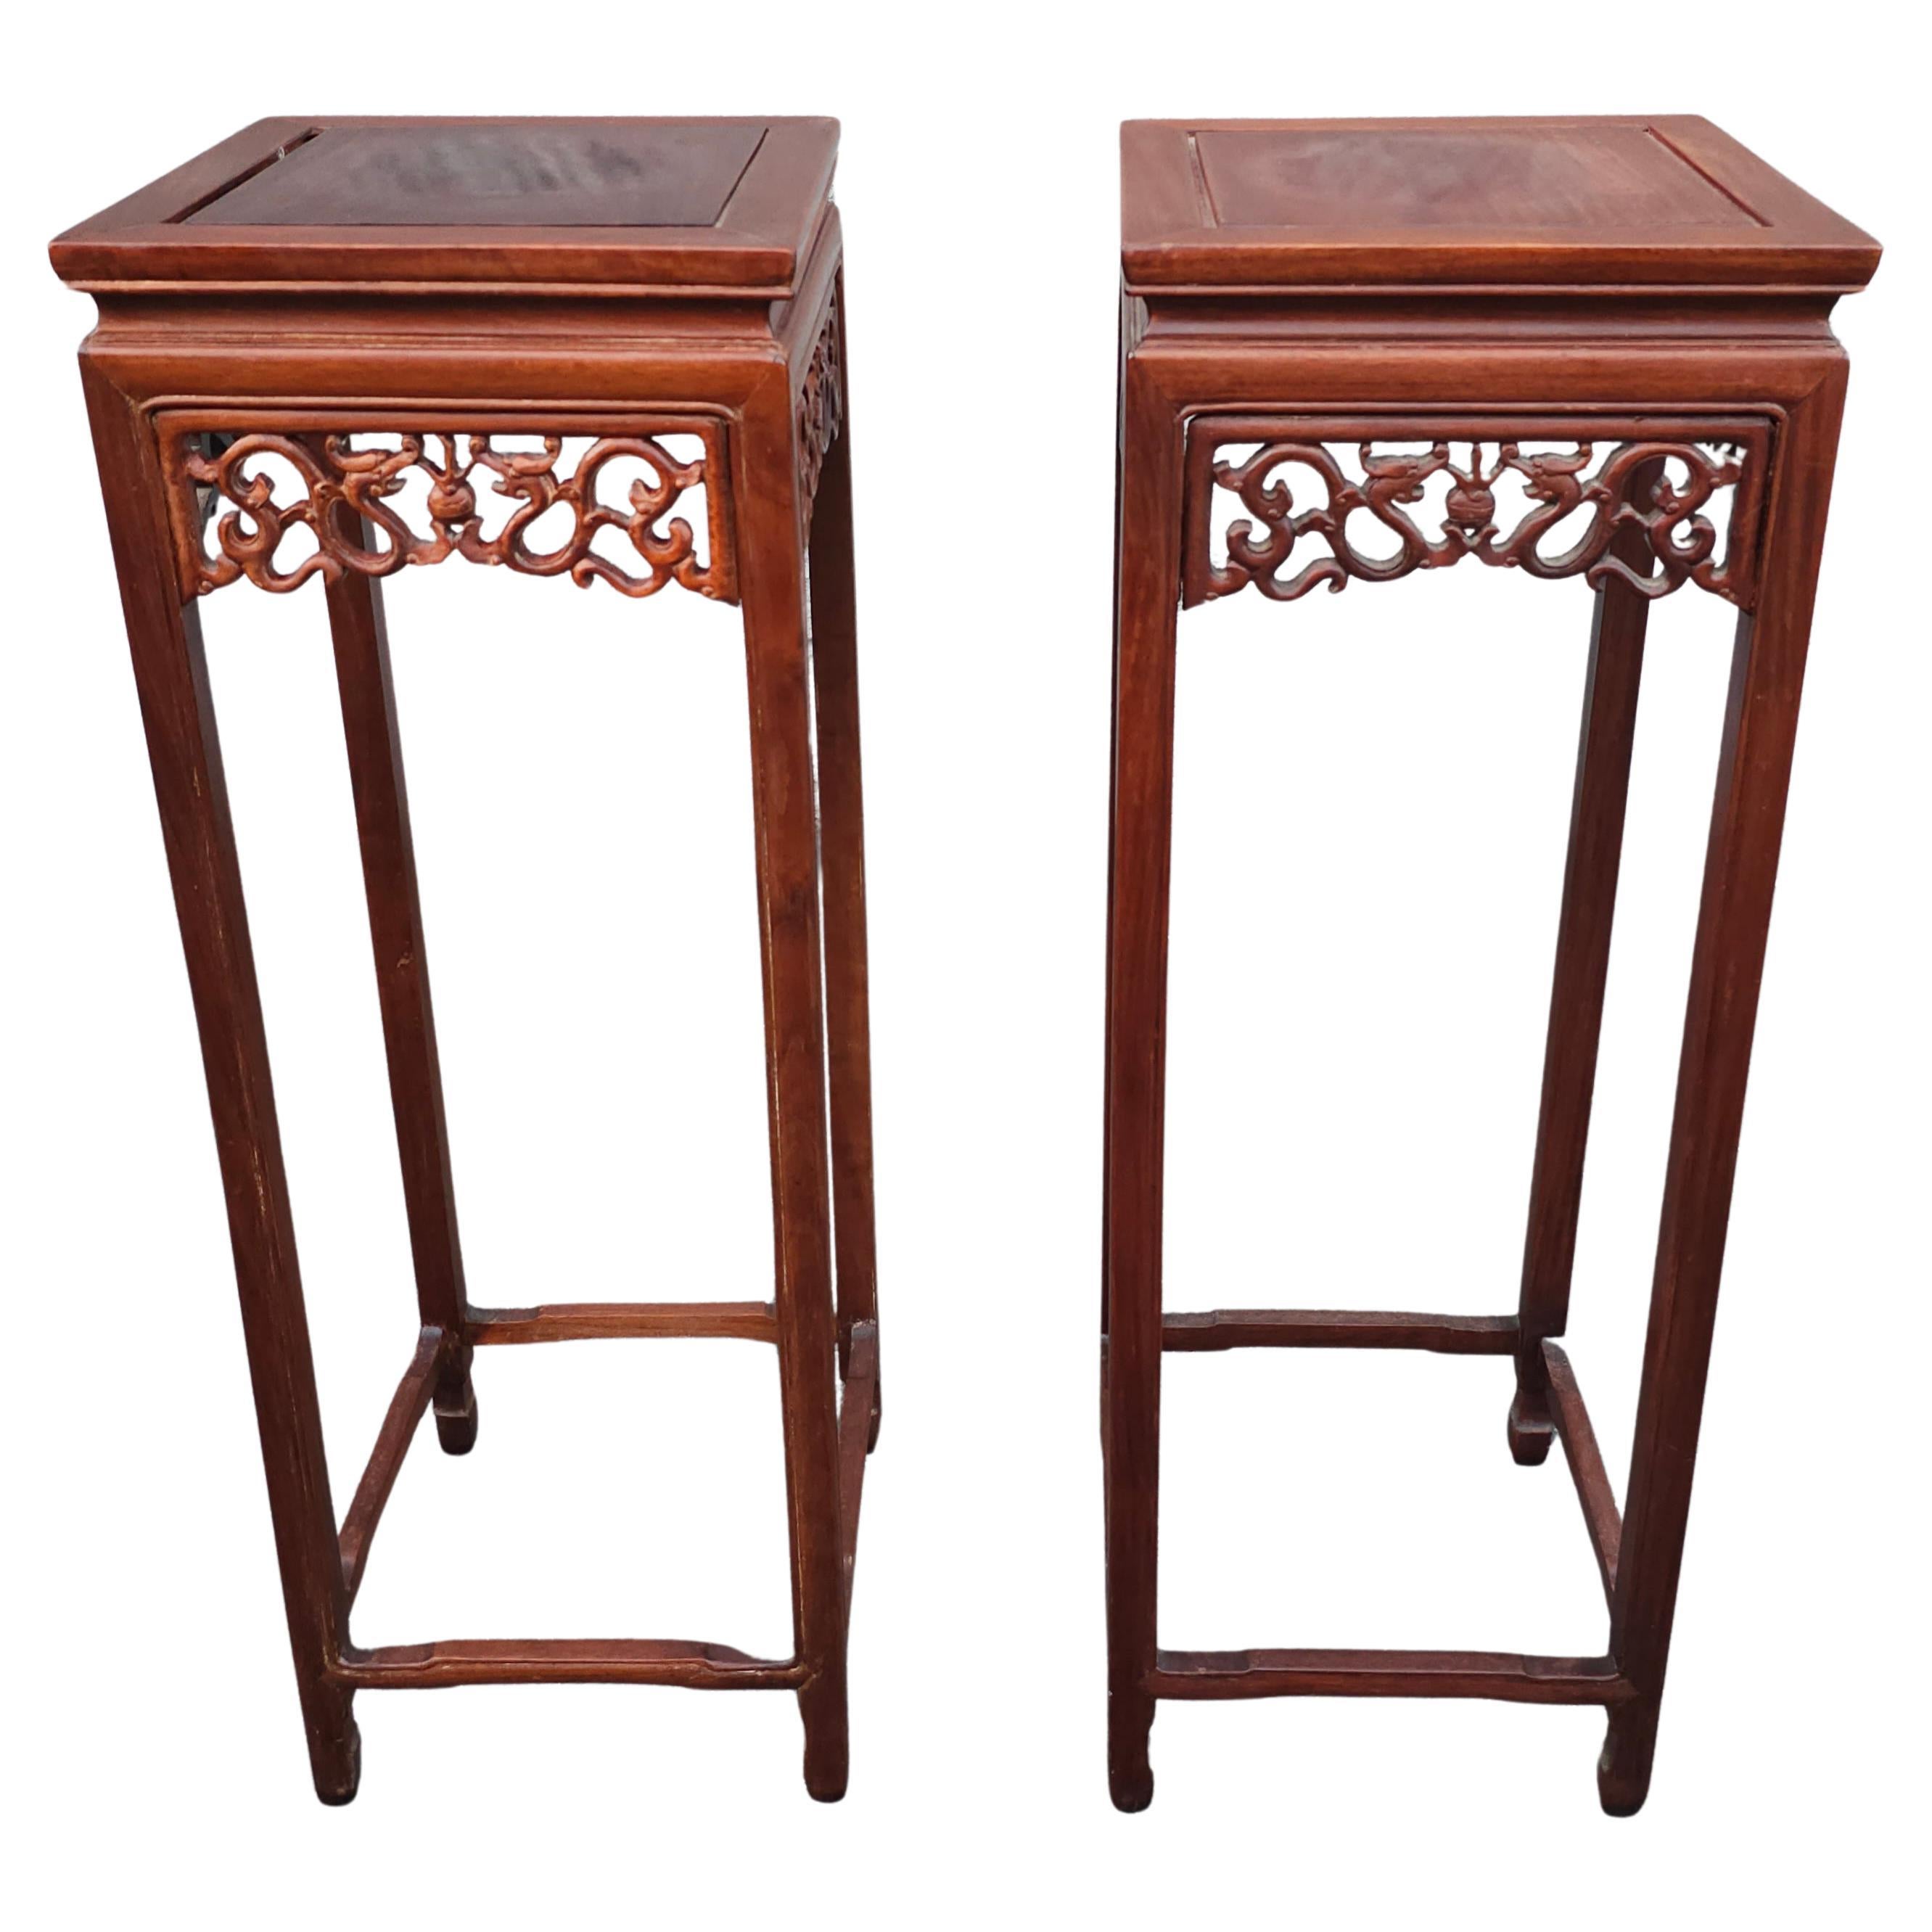 Pair of Chinese Hongmu Stands Pedestals / Plant Stands